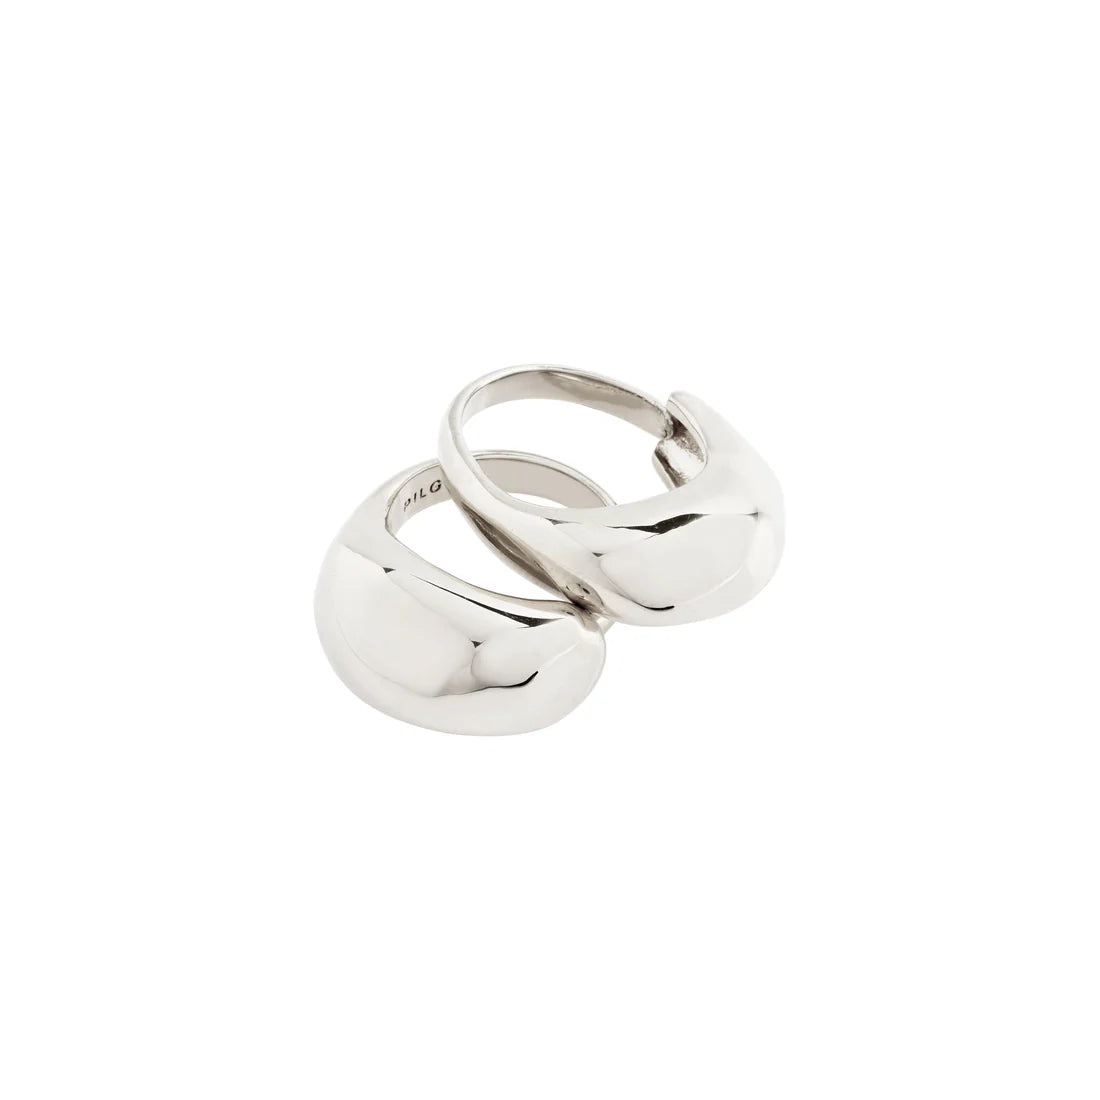 Light Ring 2 in 1 set - silver